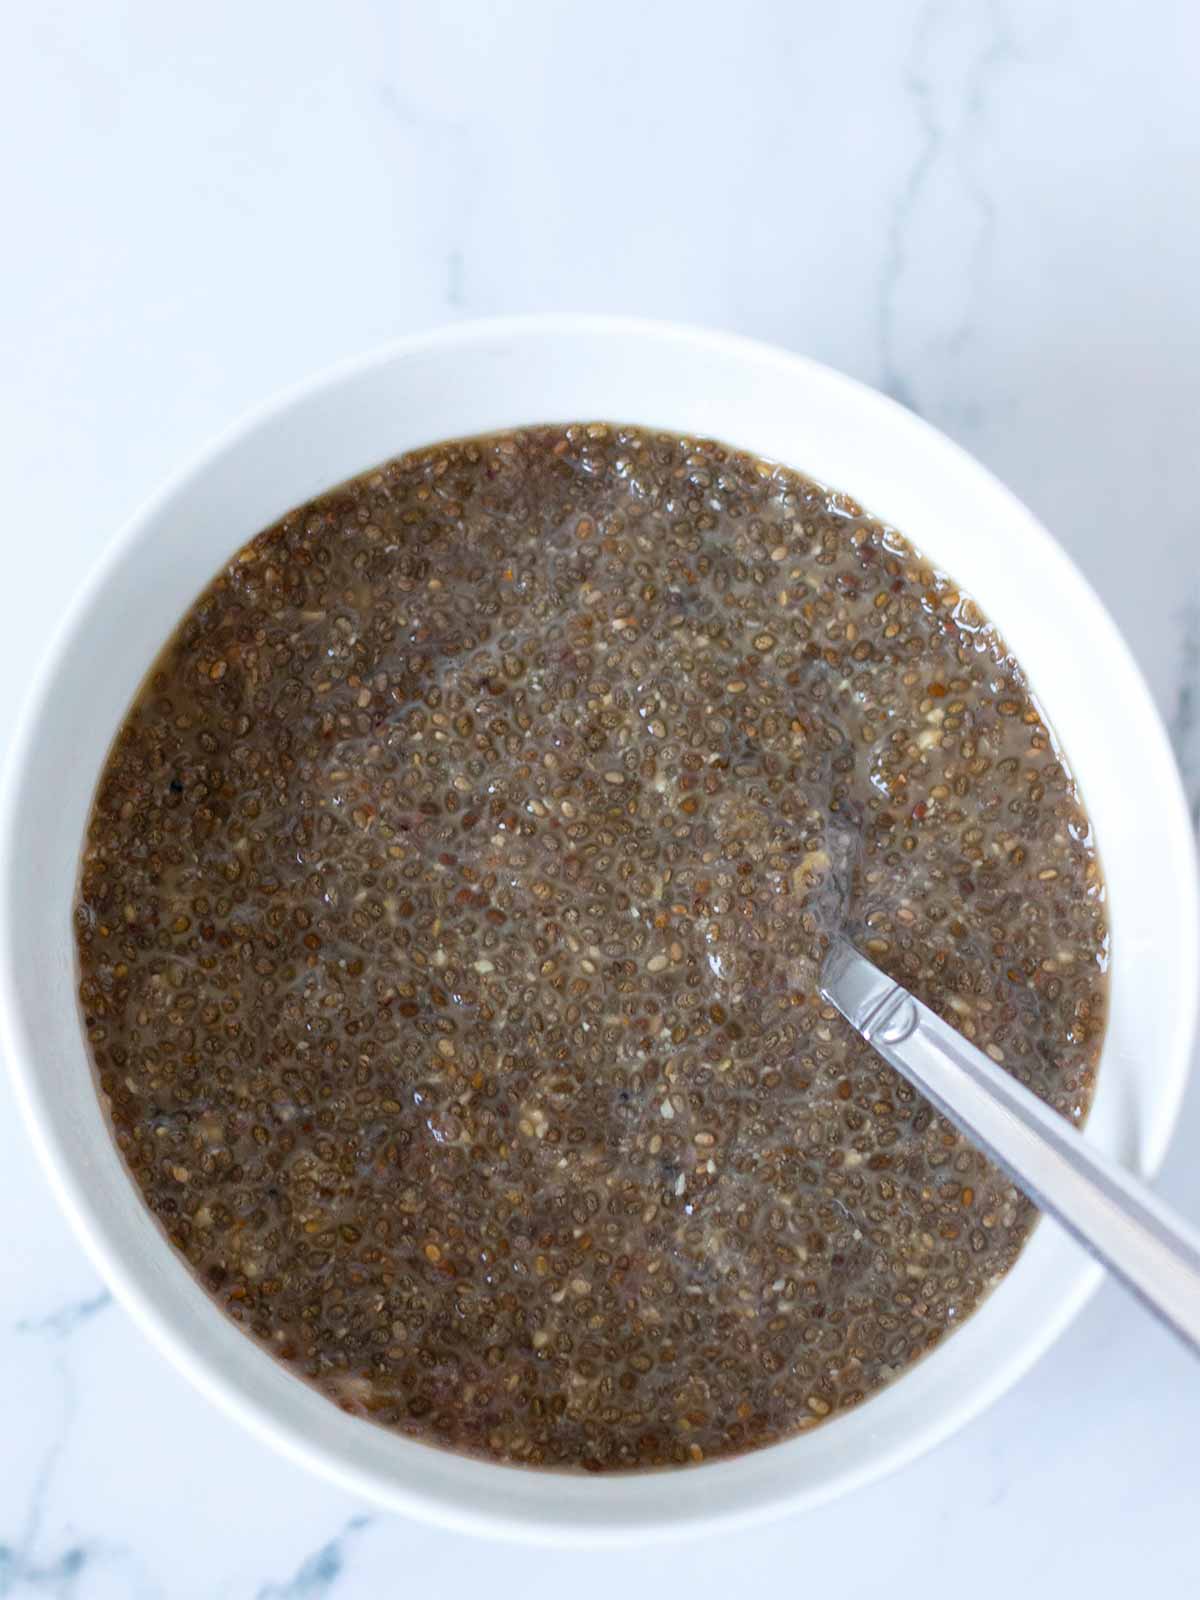 Ready-to-eat cold chia seed pudding made with instant coffee.